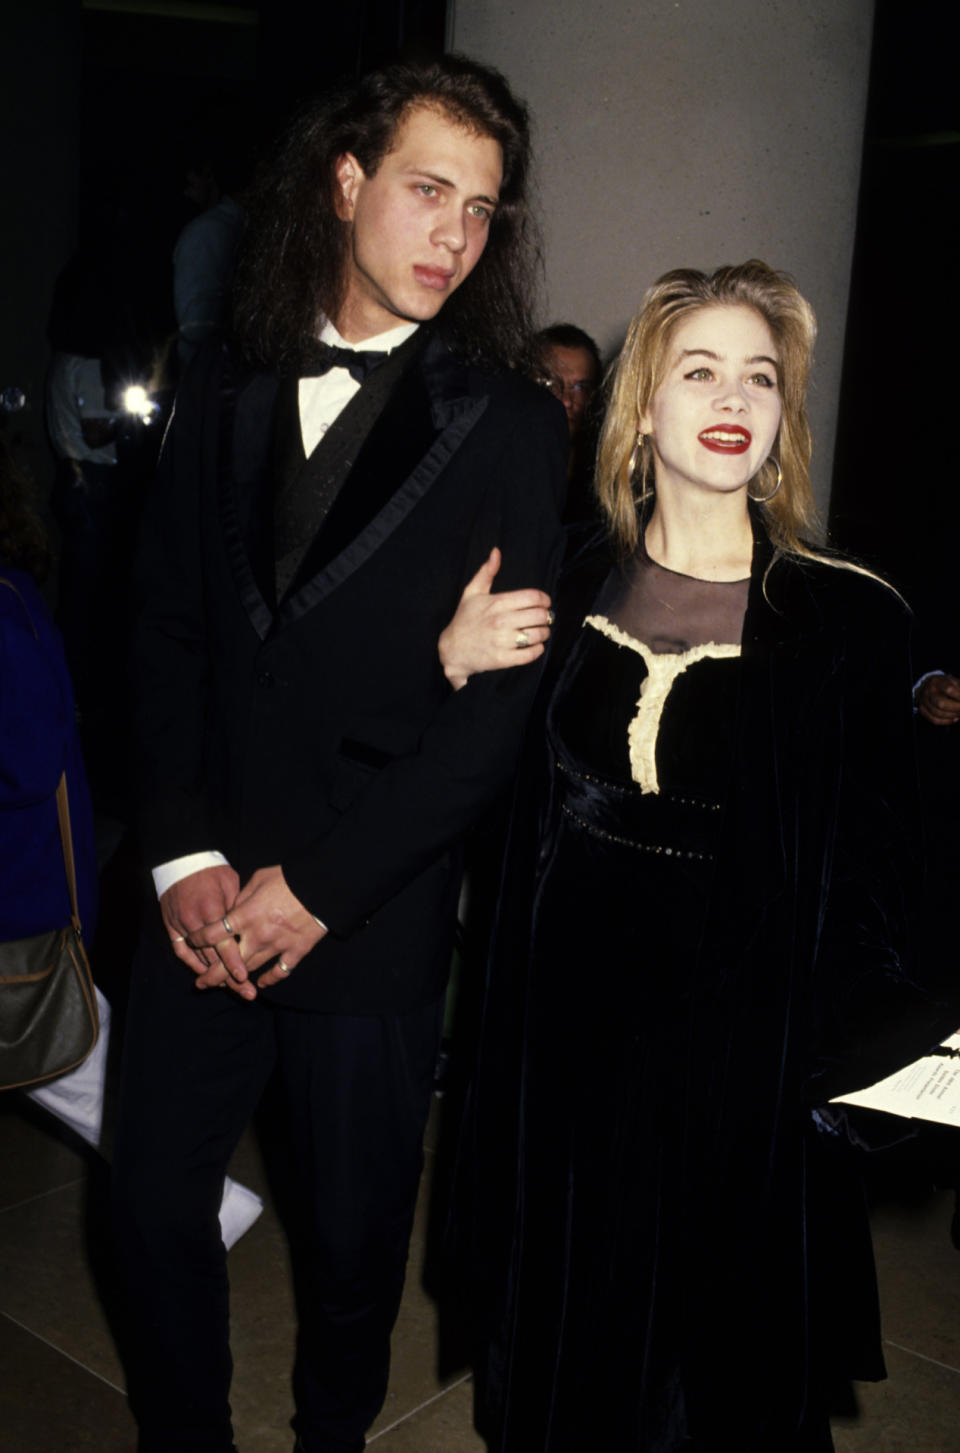 Christina Applegate at the Golden Globes in 1991. (Photo: Ron Gallela/Getty Images)